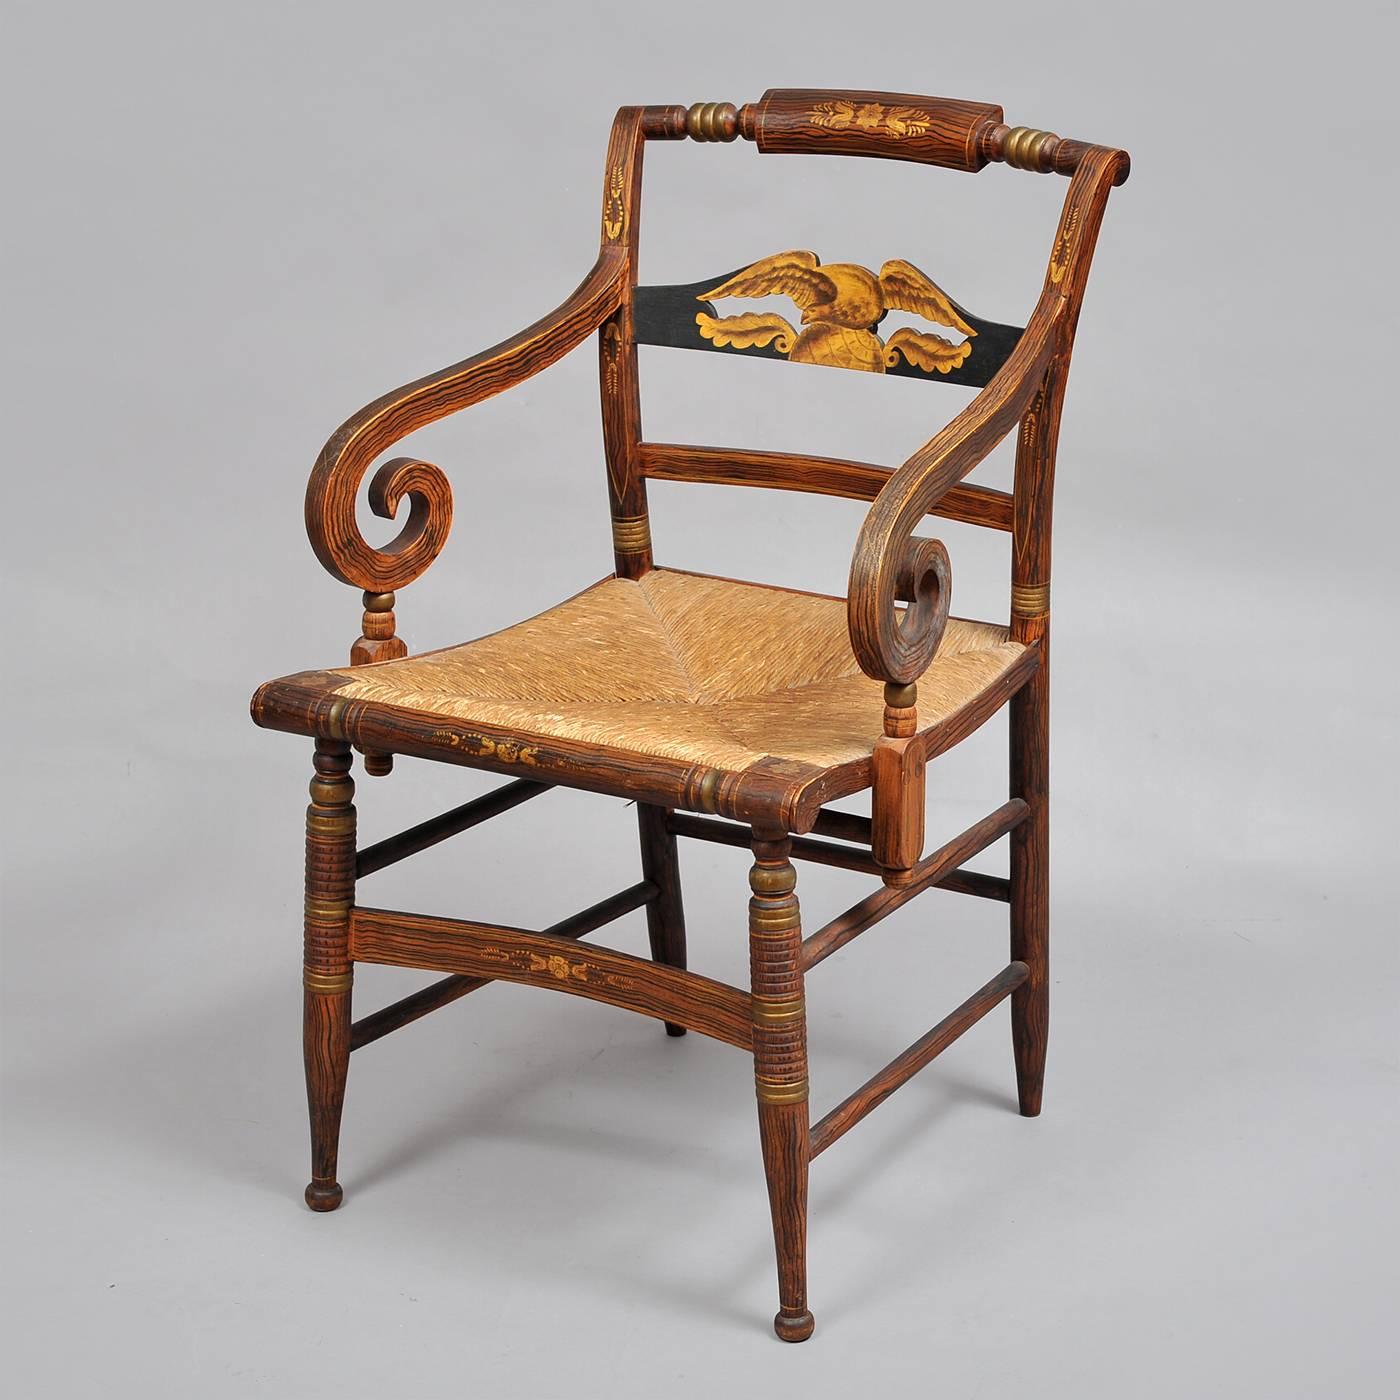 Rush seated armchair, flanked by scrolled arms with carved pierced splat depicting an eagle perched on a globe in gilt stencil. The chair boasts turned tapered legs, fluting with contrasting veneers. Typical of the Sheraton style with swags,